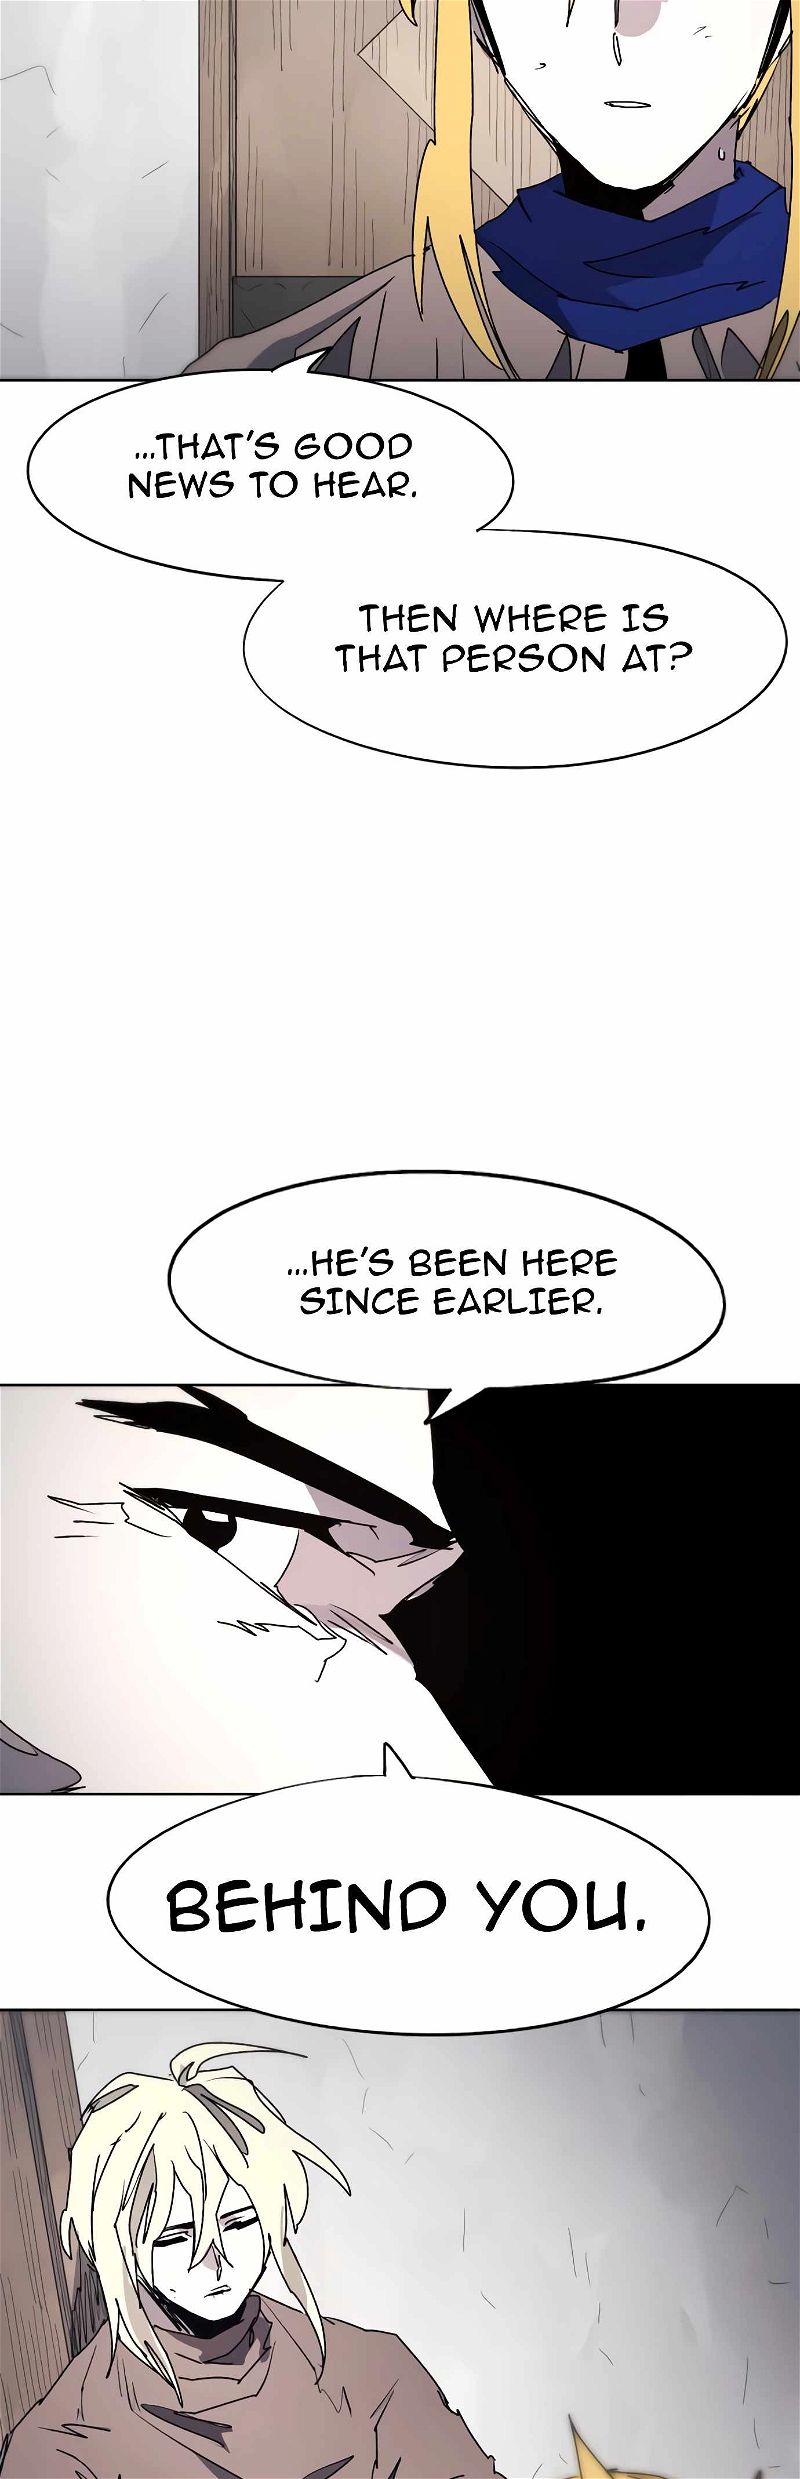 The Knight of Embers Chapter 97 page 17